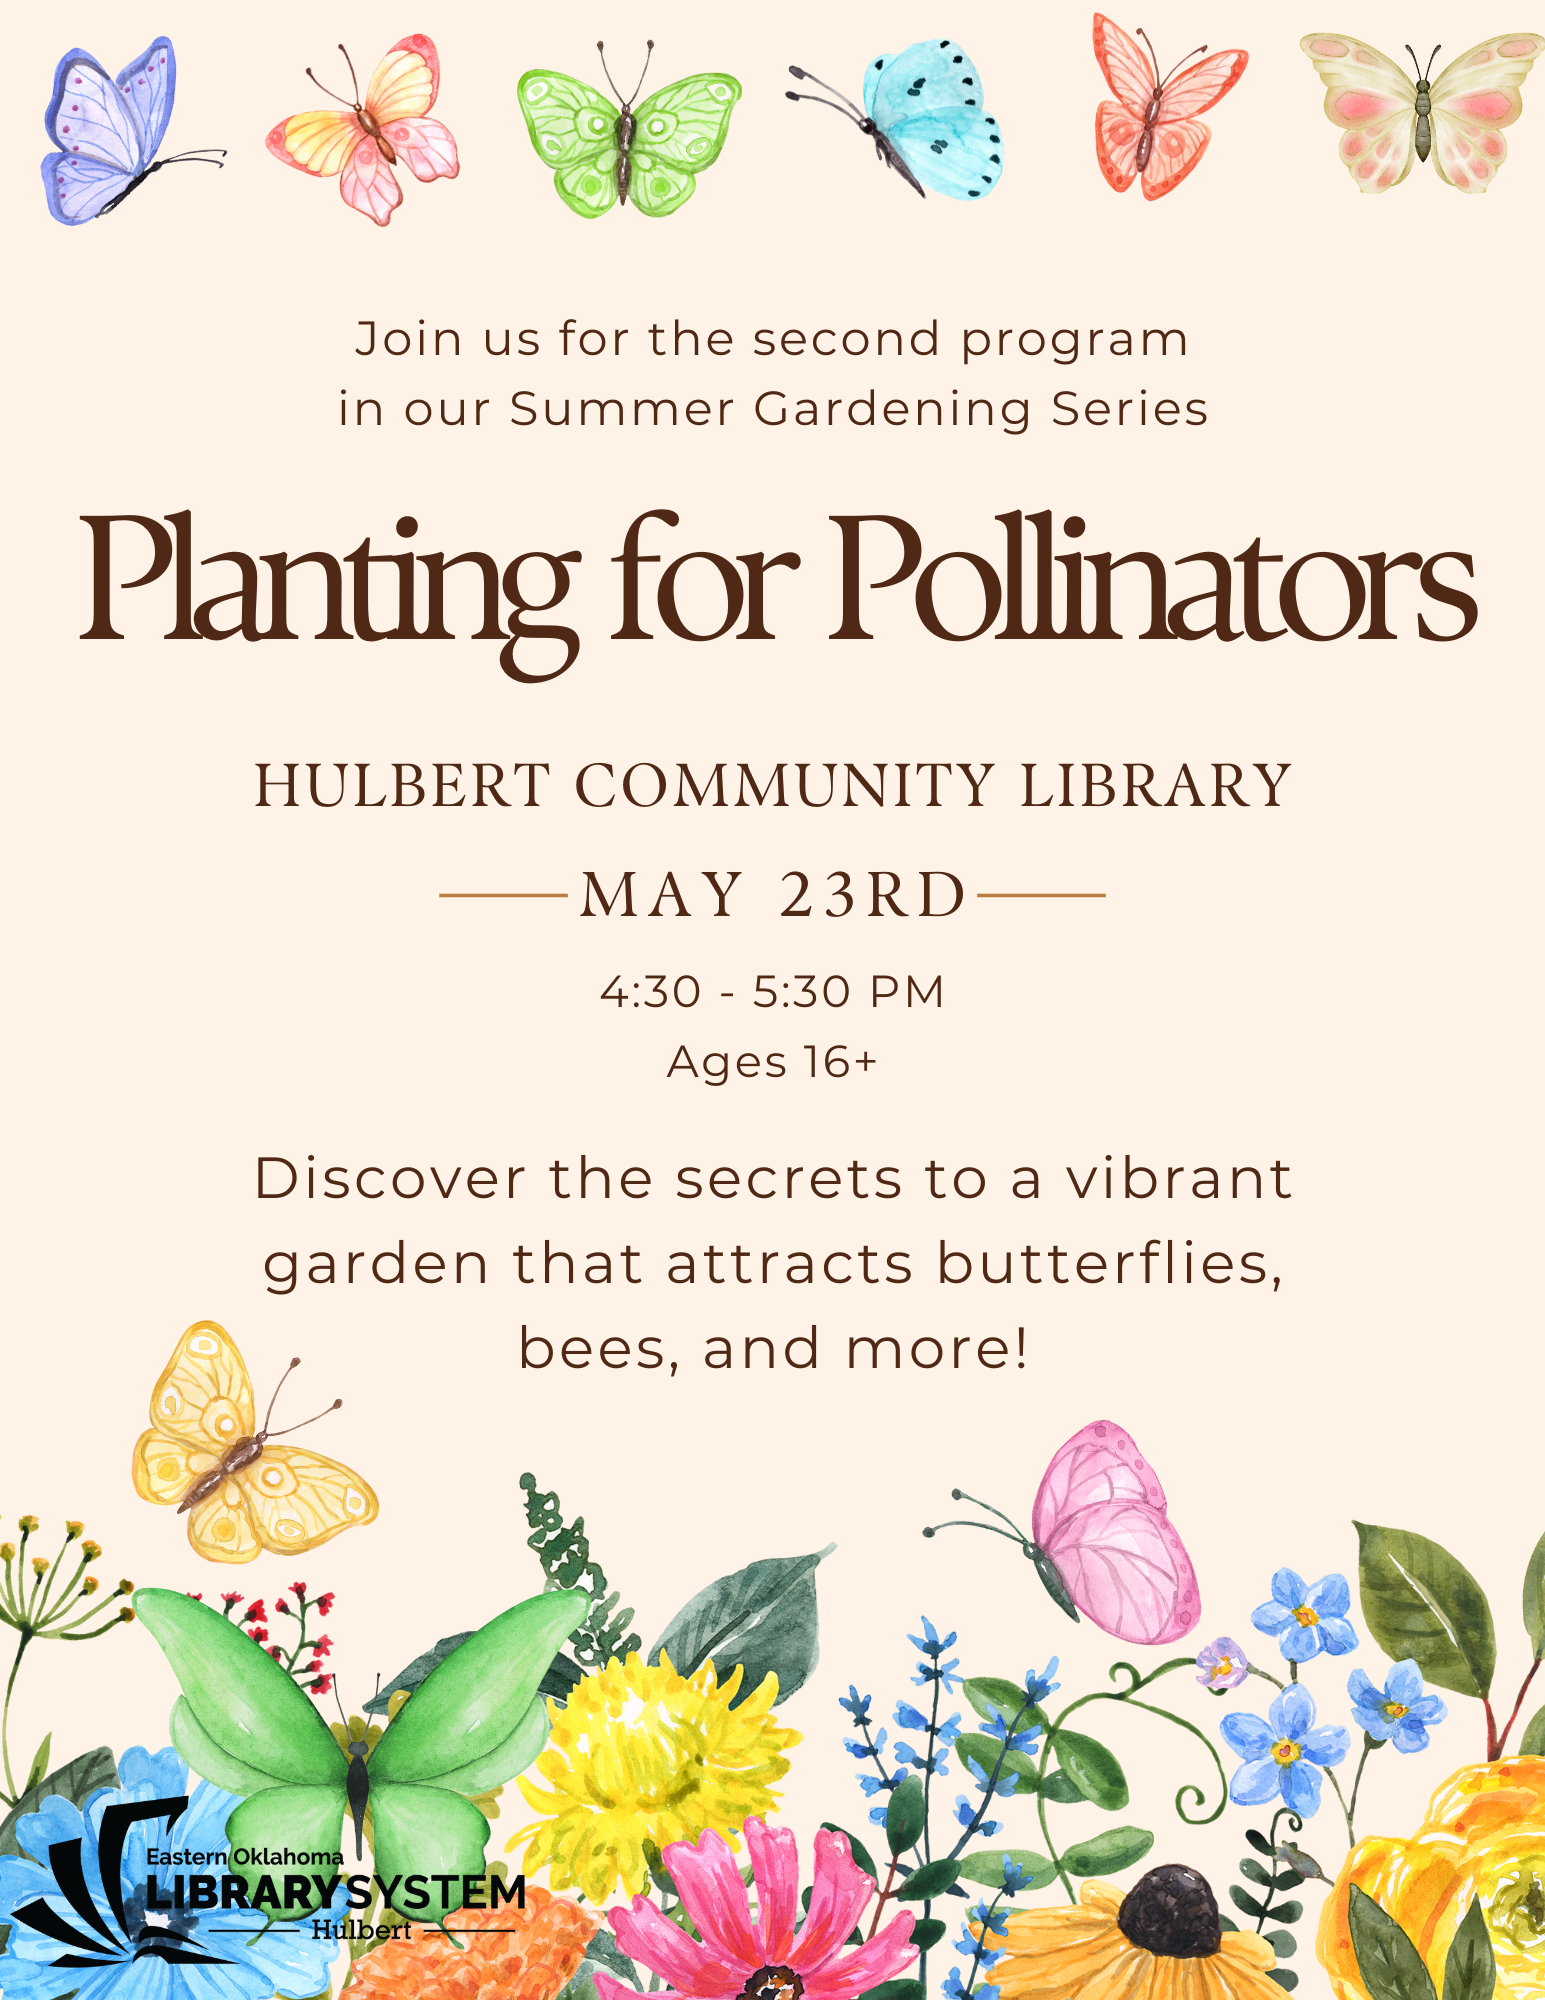 Planting for Pollinators at Hulbert Community Library